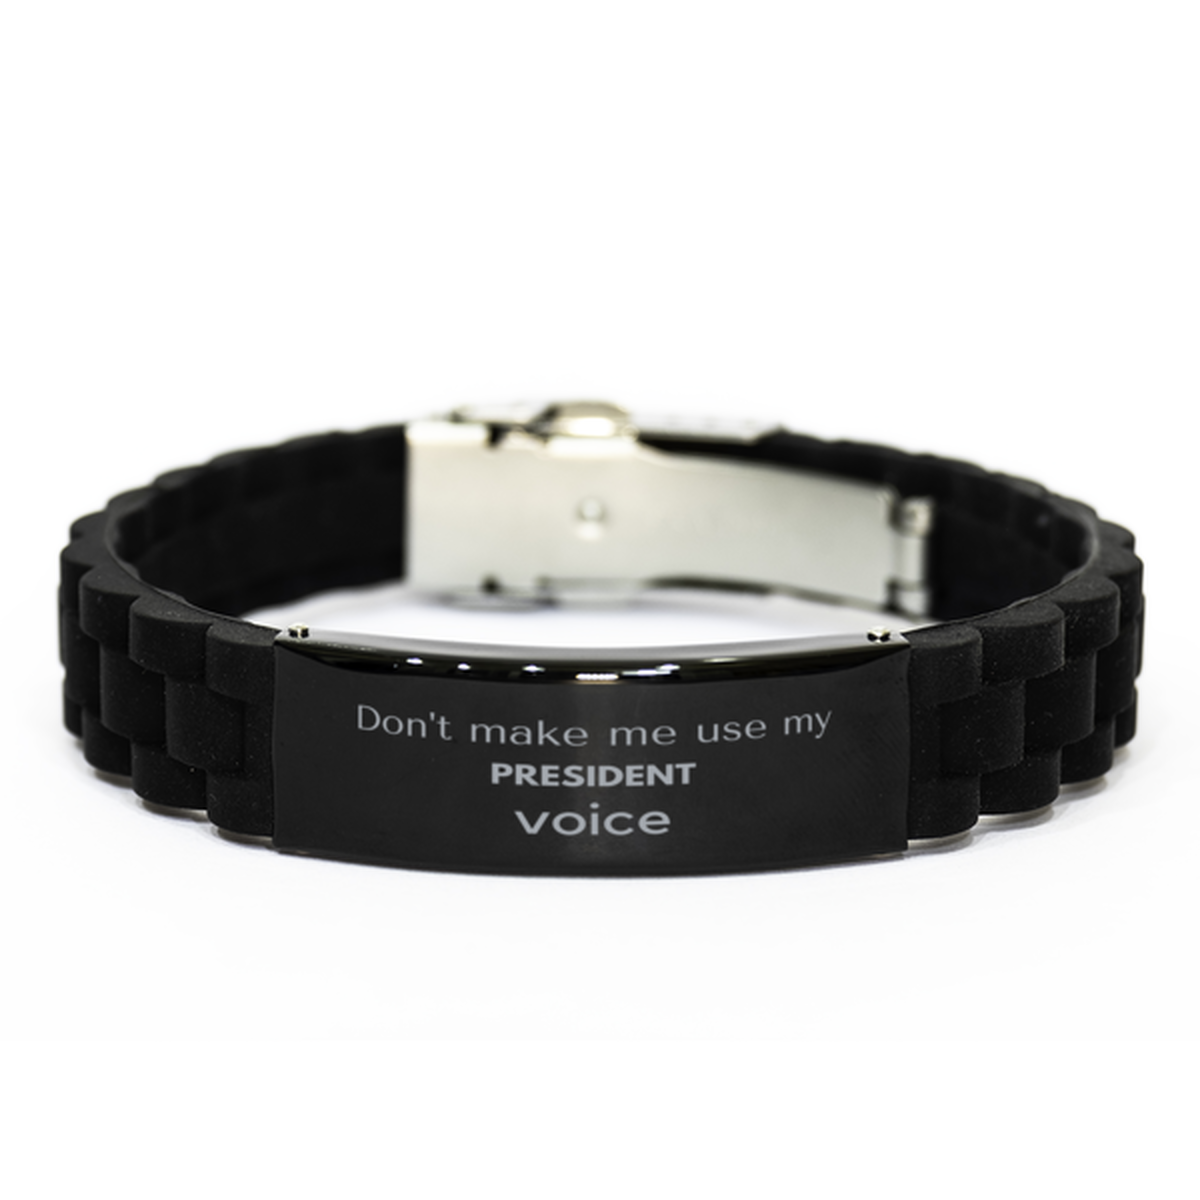 Don't make me use my President voice, Sarcasm President Gifts, Christmas President Black Glidelock Clasp Bracelet Birthday Unique Gifts For President Coworkers, Men, Women, Colleague, Friends